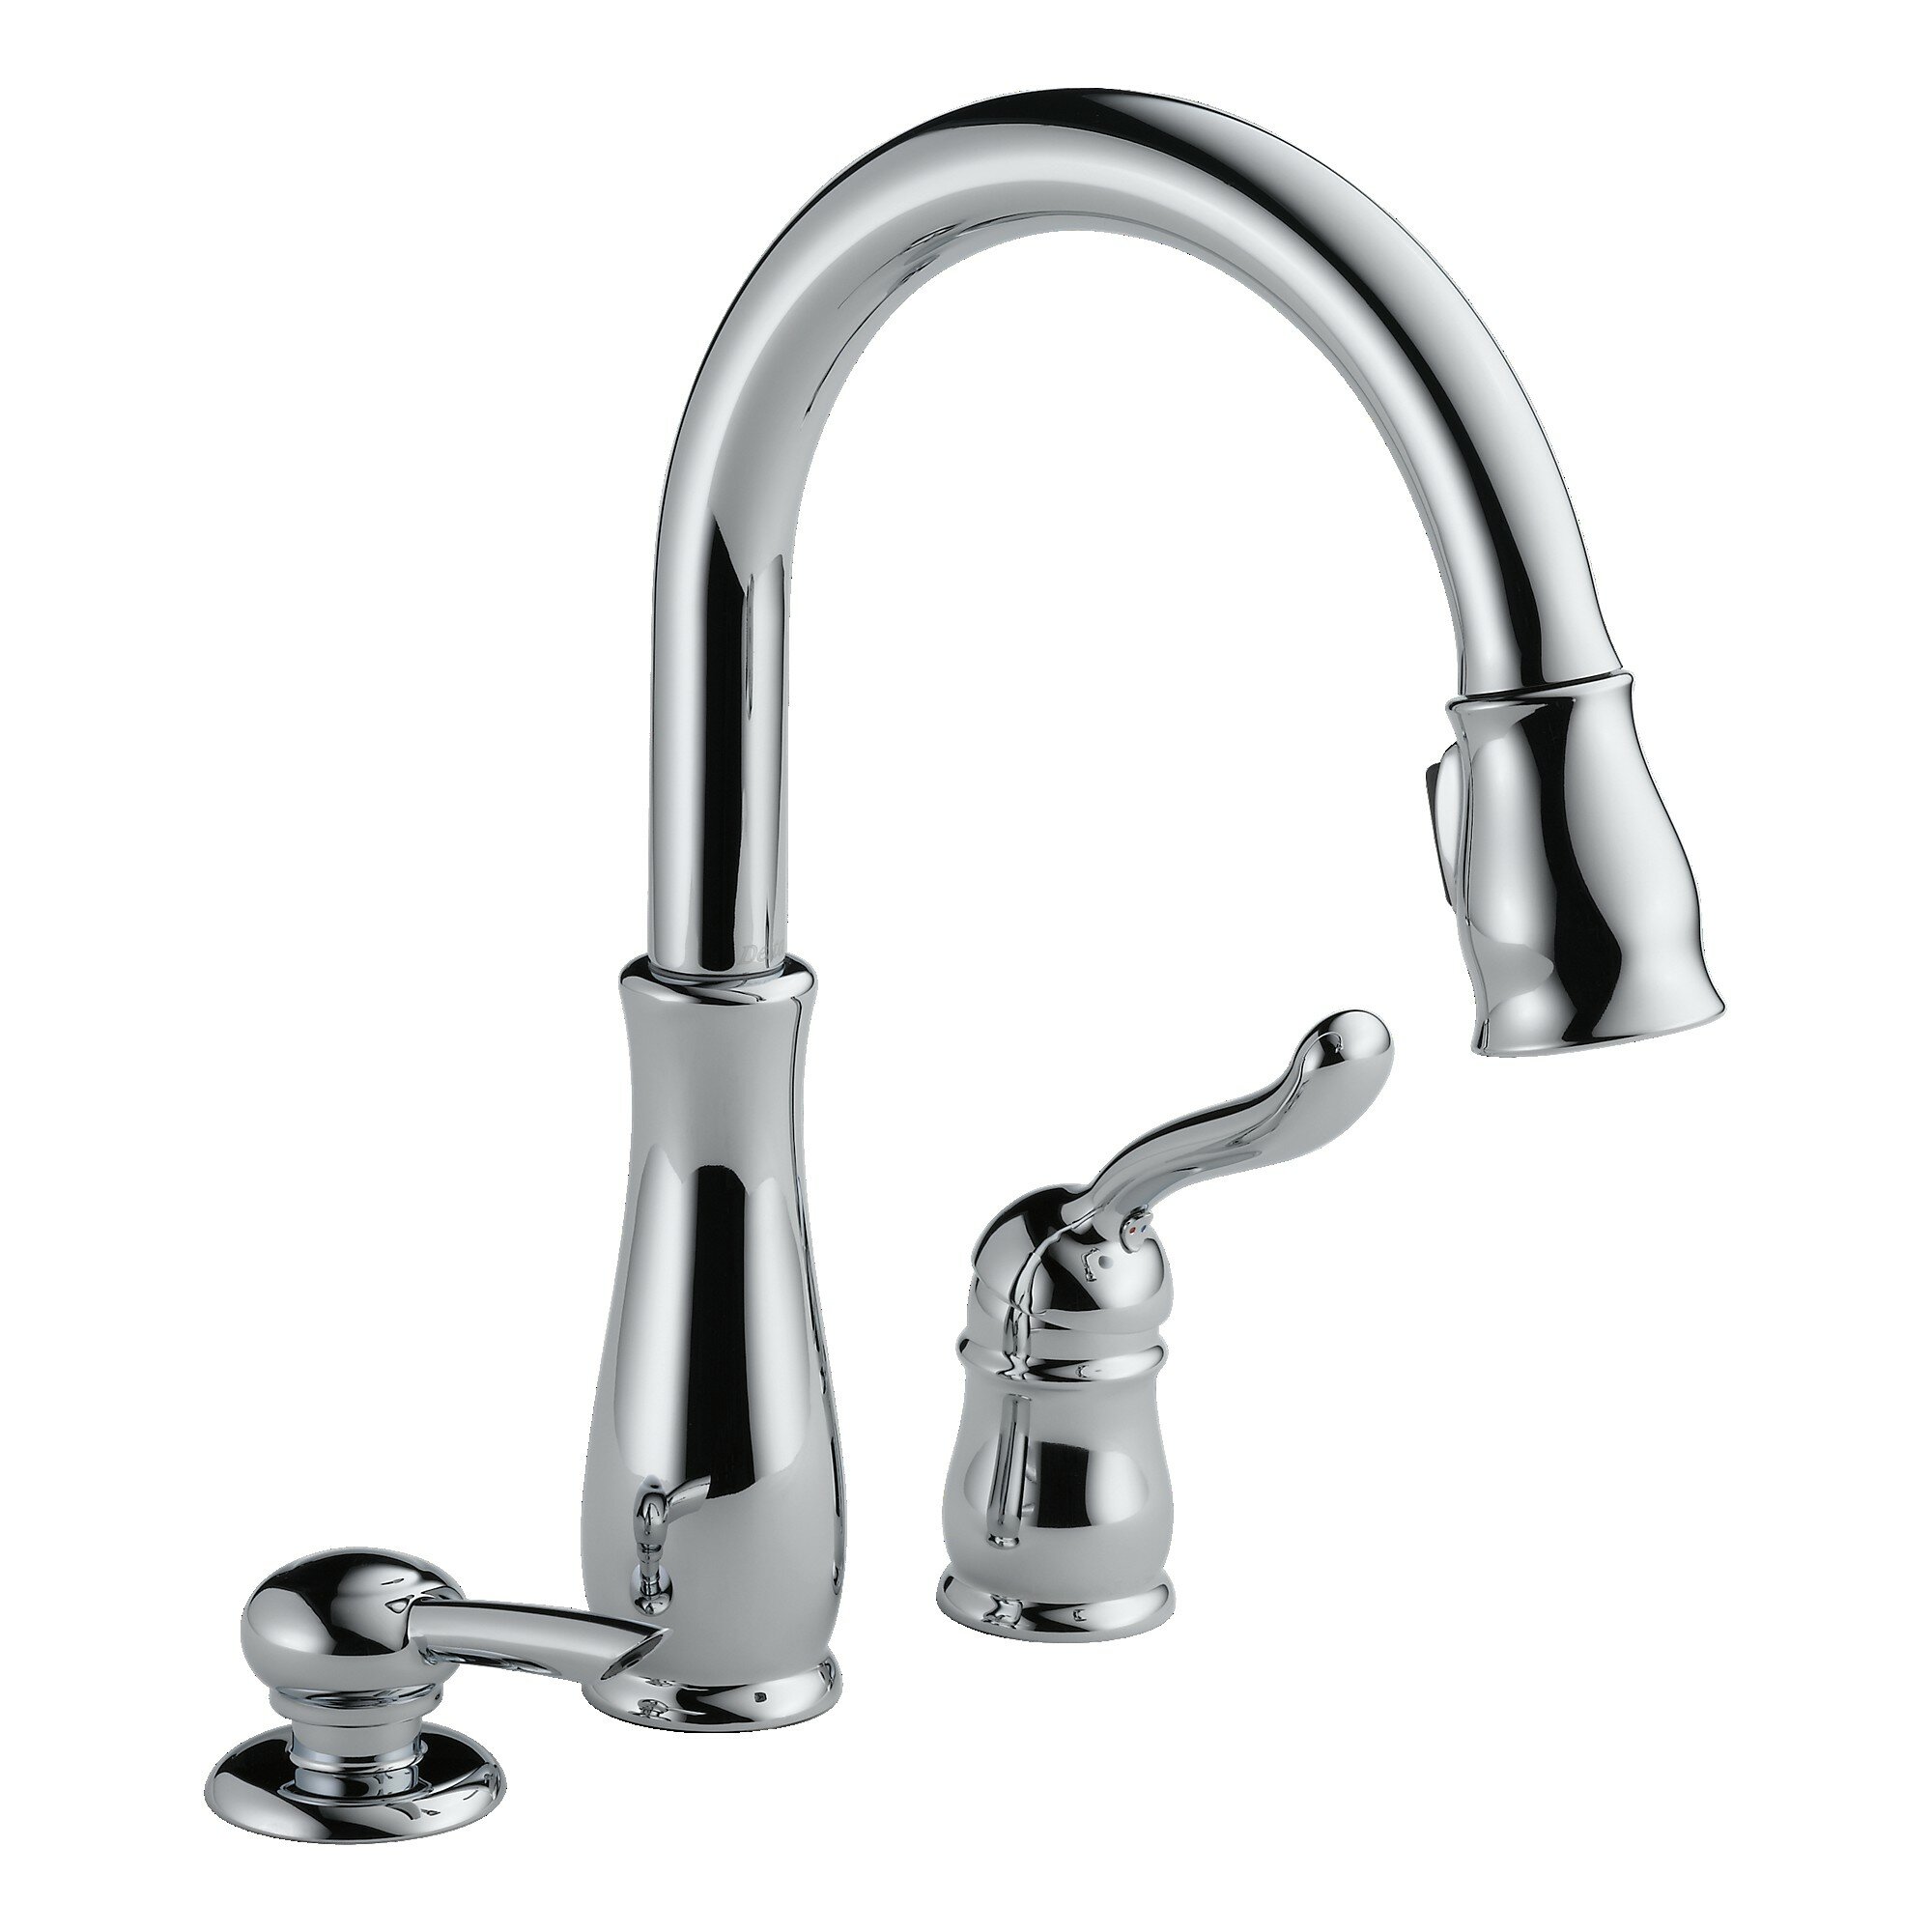 978 SD DST Delta Lel Pull Down Single Handle Kitchen Faucet with 